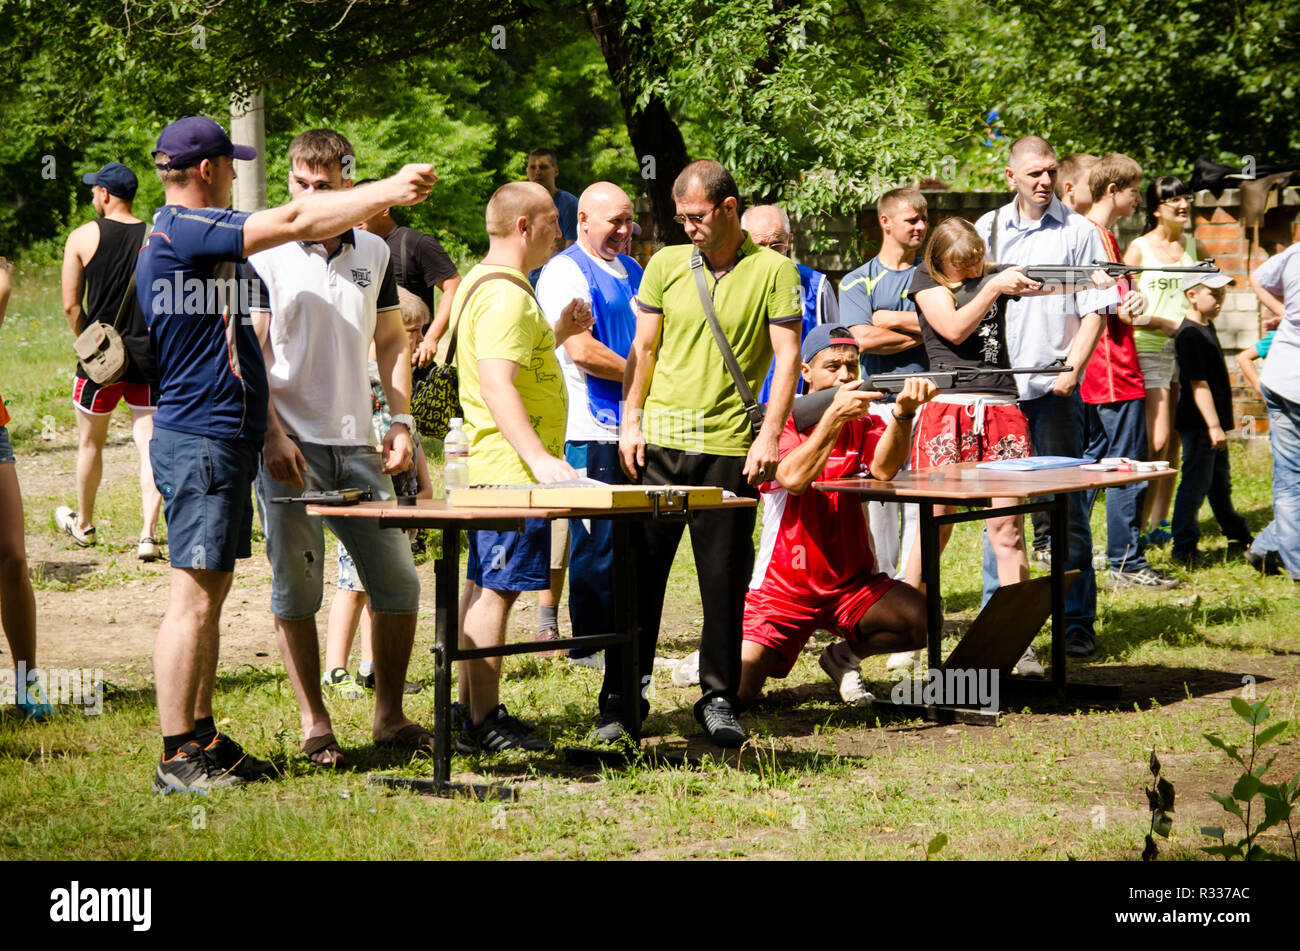 Komsomolsk-on-Amur, Russia - August 1, 2016. Public open Railroader's day. man shows his neighbor how to shoot sports pistol at amateur competitions Stock Photo